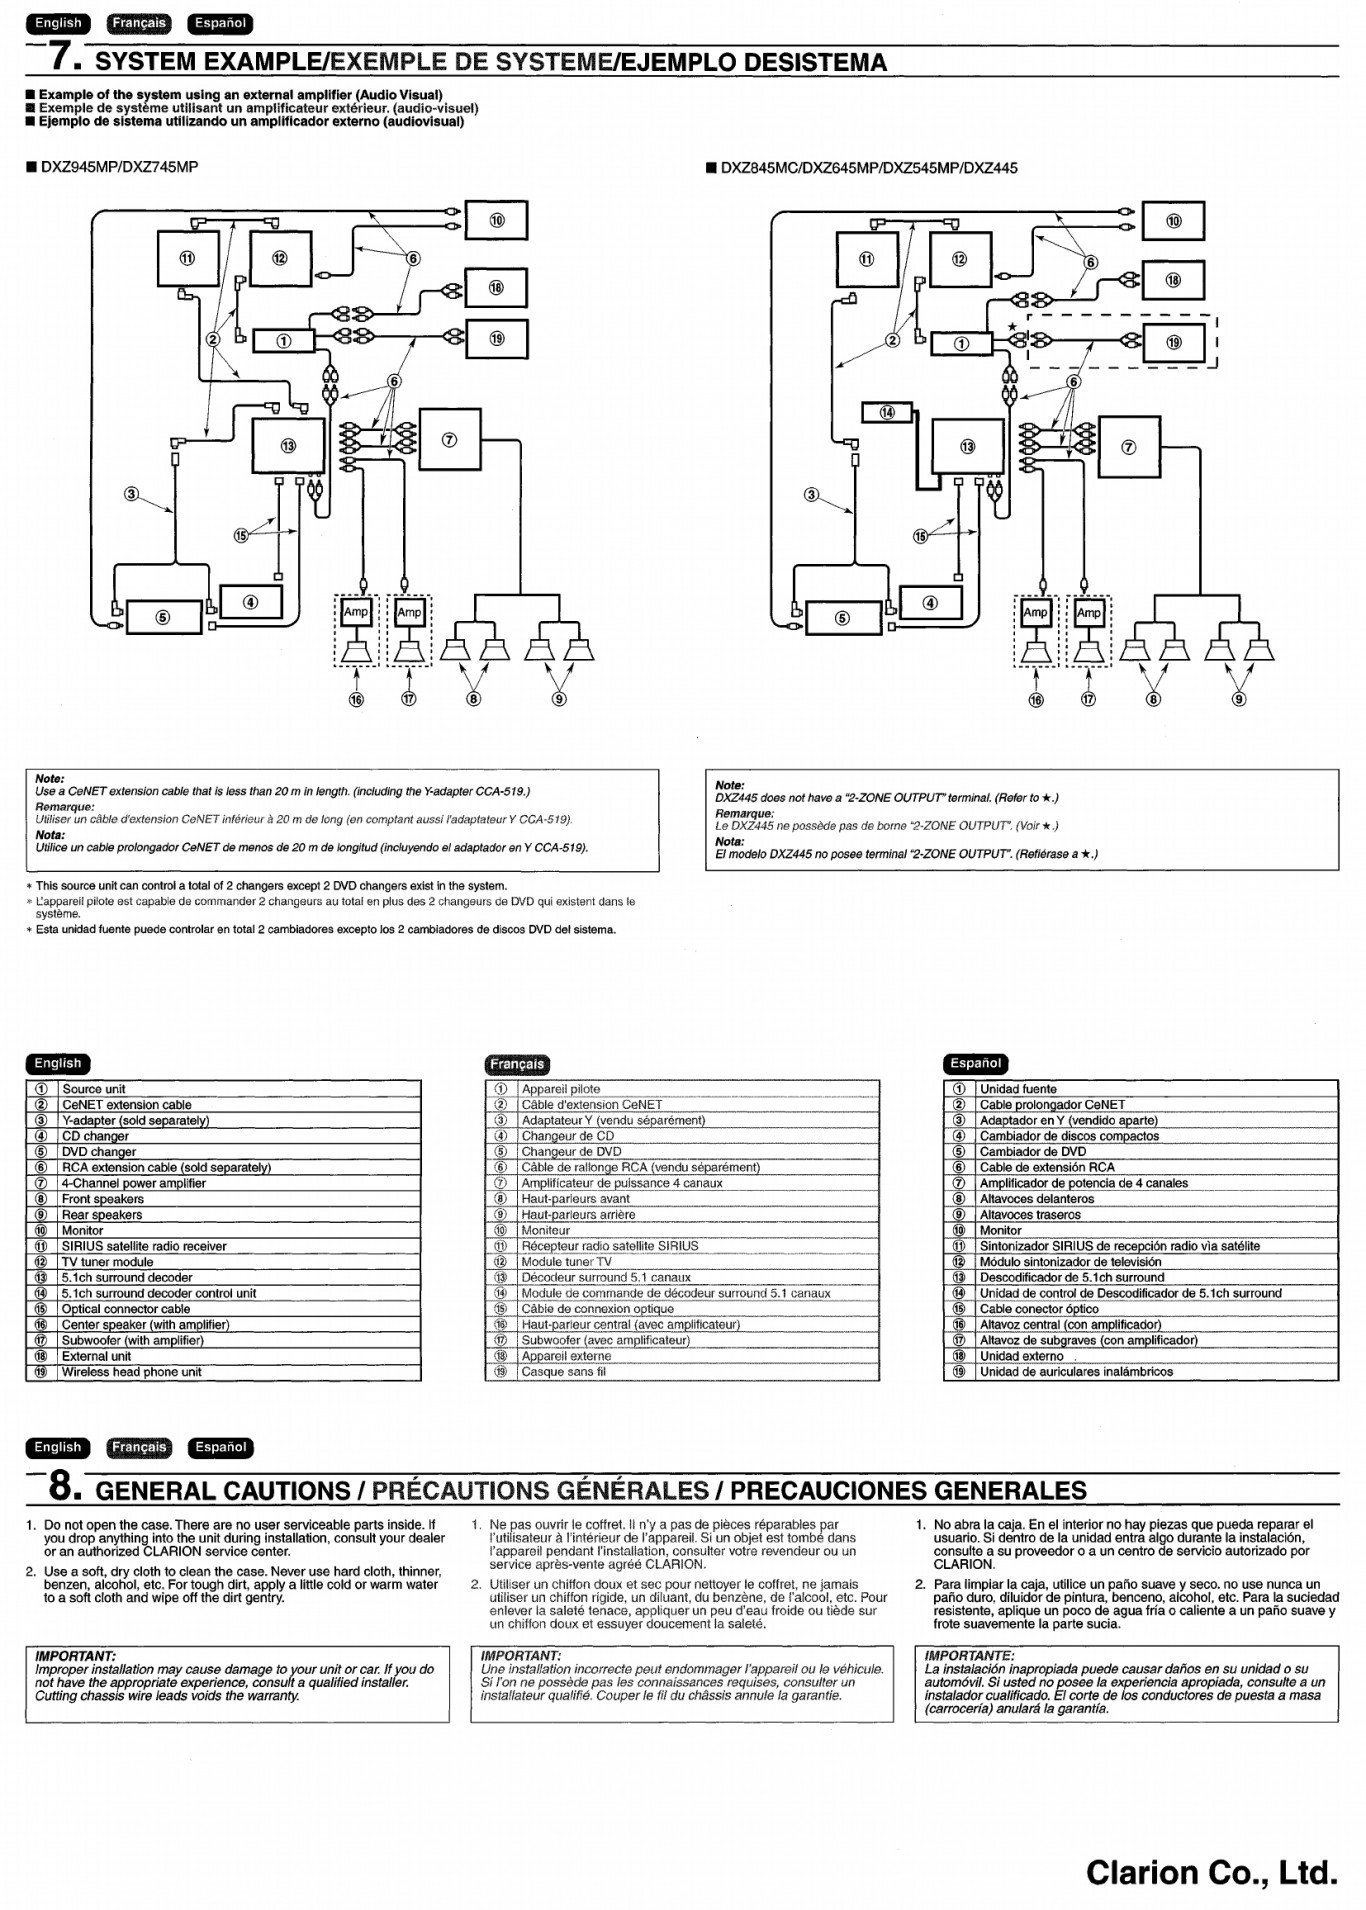 Clarion Car Stereo Wiring Diagram New Stereo Wiring Diagram Diagram Of Clarion Car Stereo Wiring Diagram